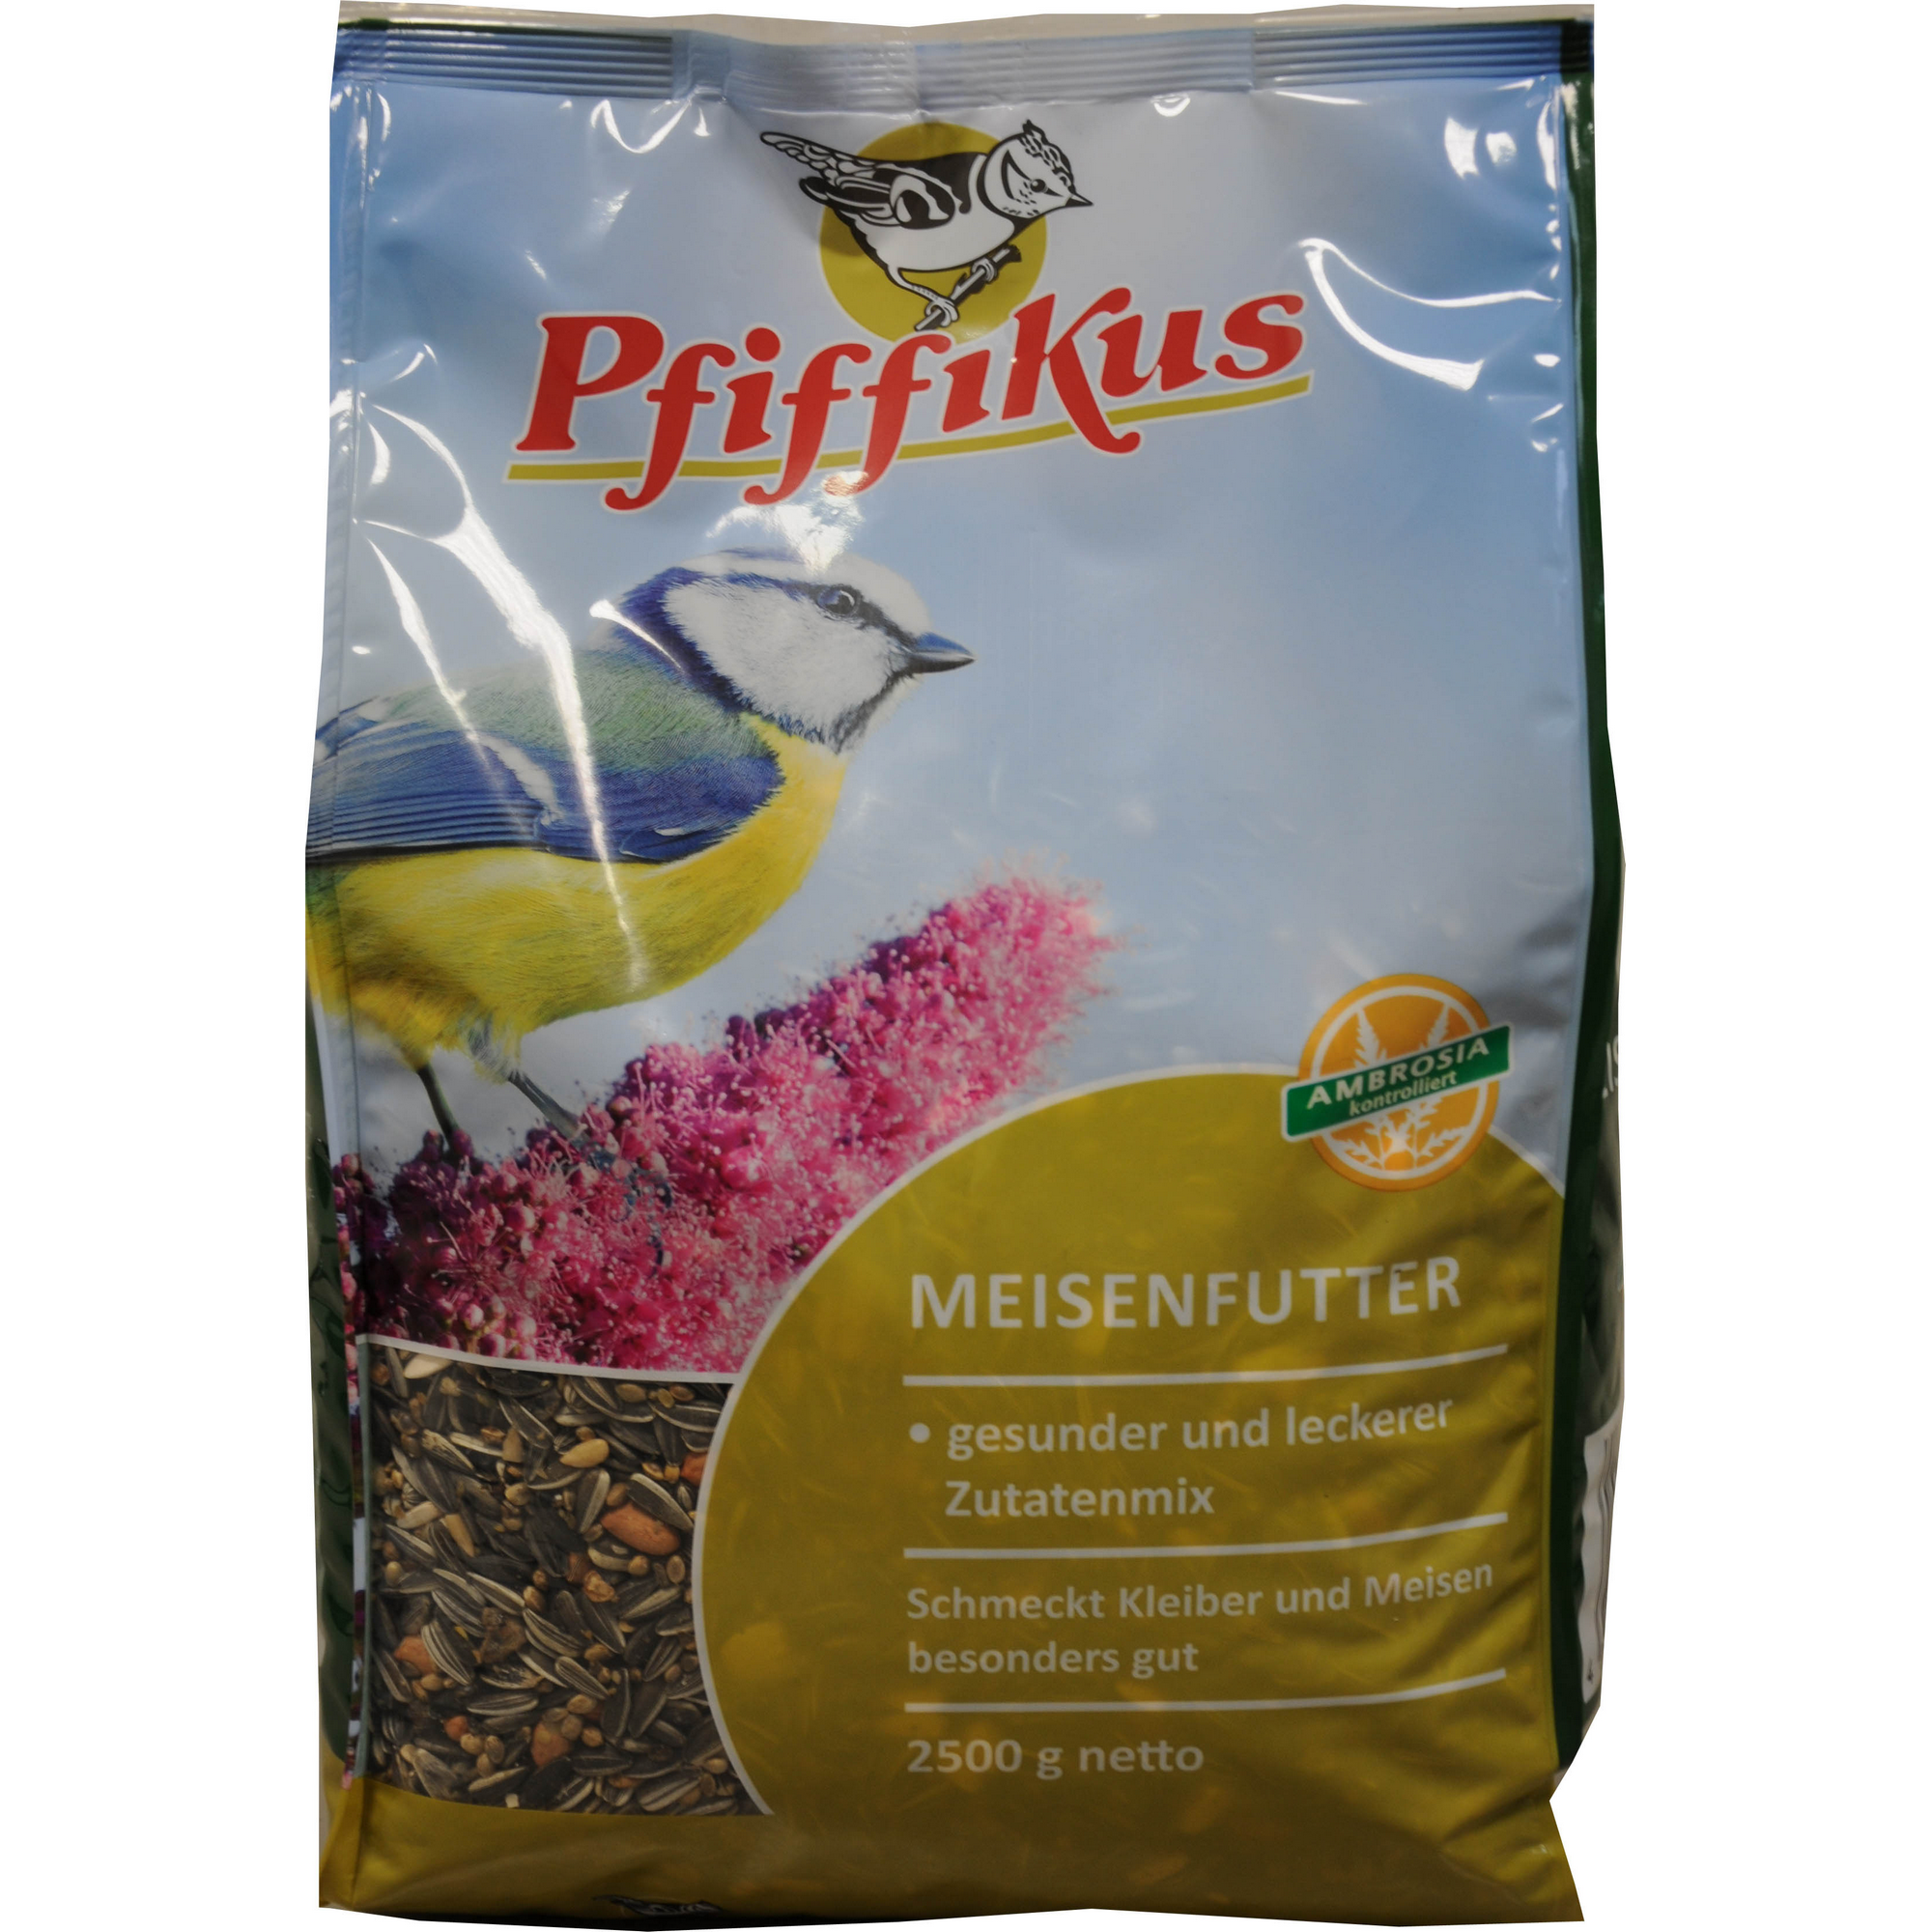 Meisenfutter 2,5 kg + product picture